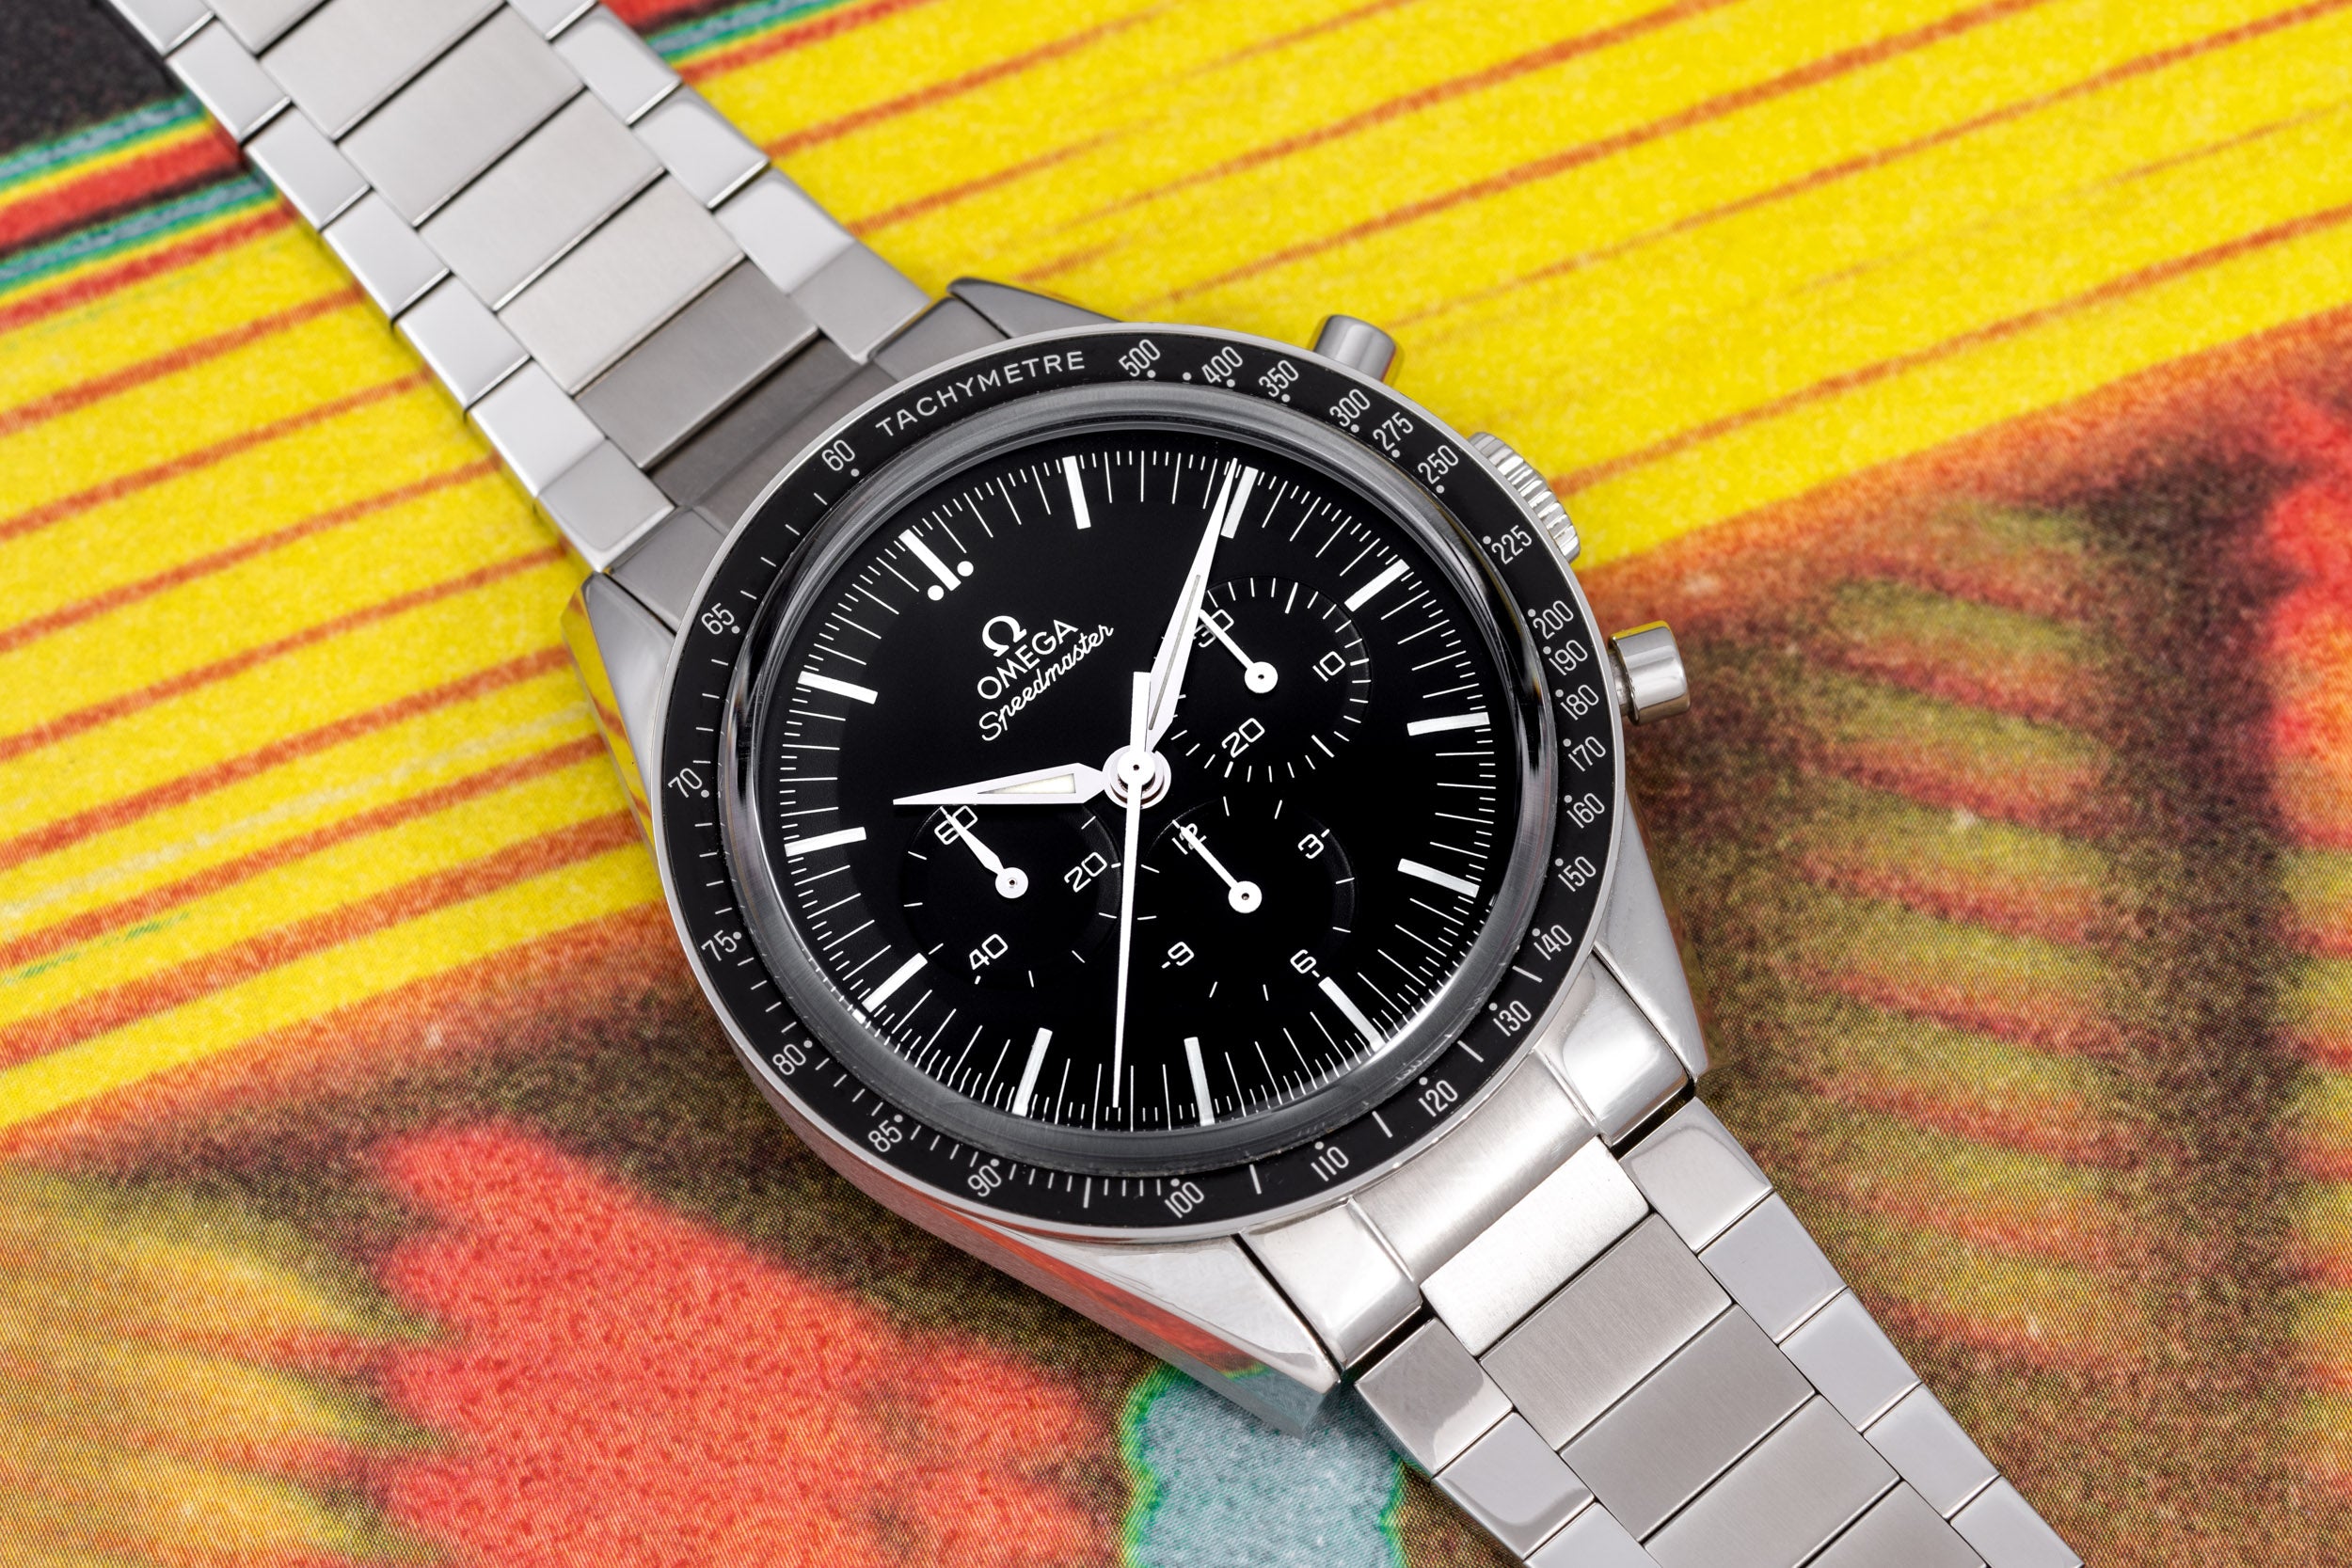 Omega Speedmaster 'First Omega In Space'